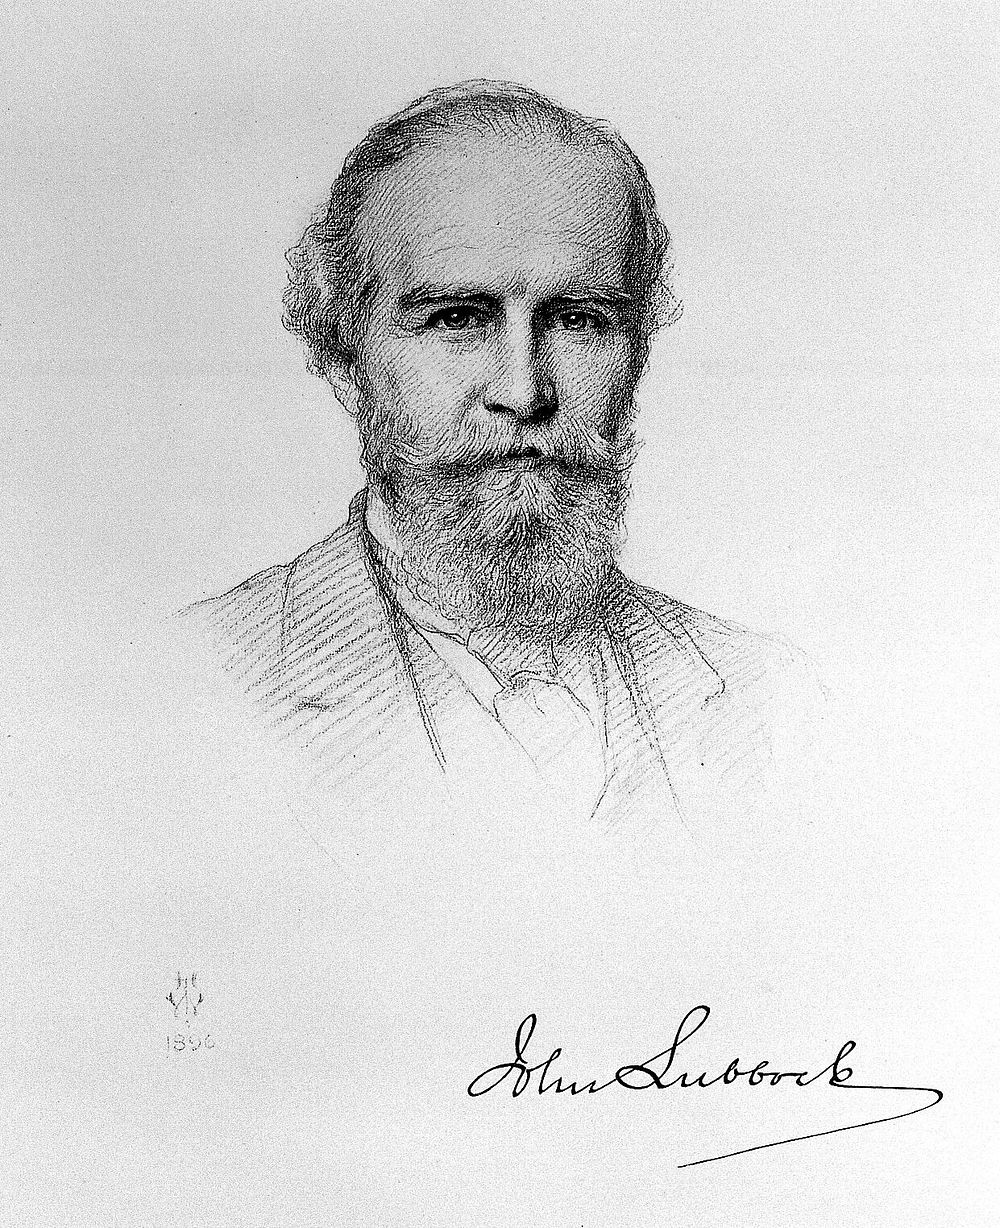 Sir John Lubbock, Baron Avebury. Reproduction after pencil drawing by H. T. Wells, 1896.